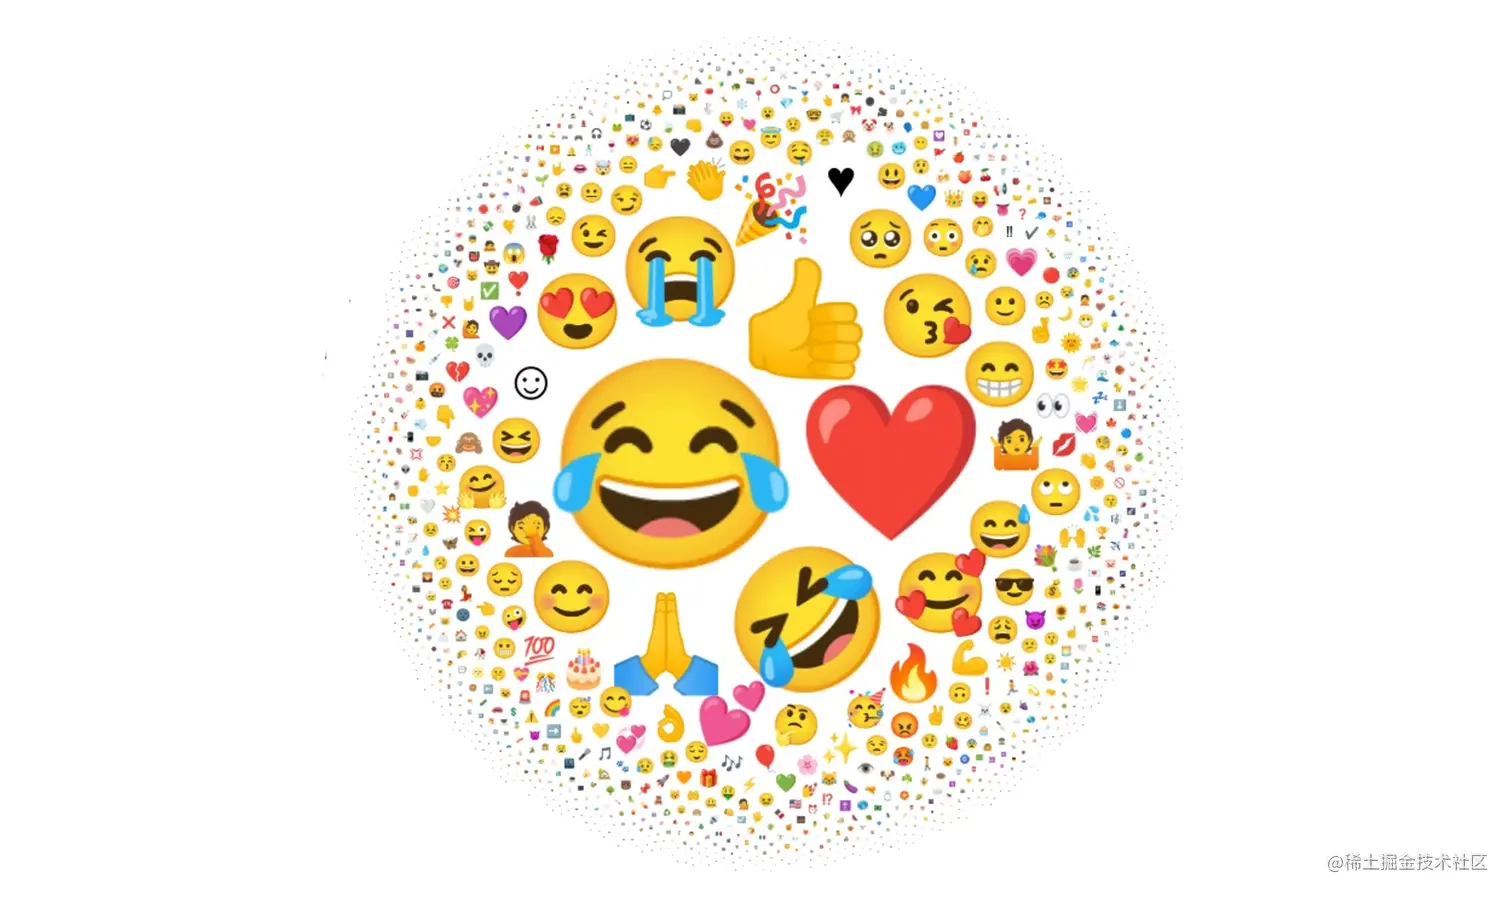 The Most Frequently Used Emoji of 2021